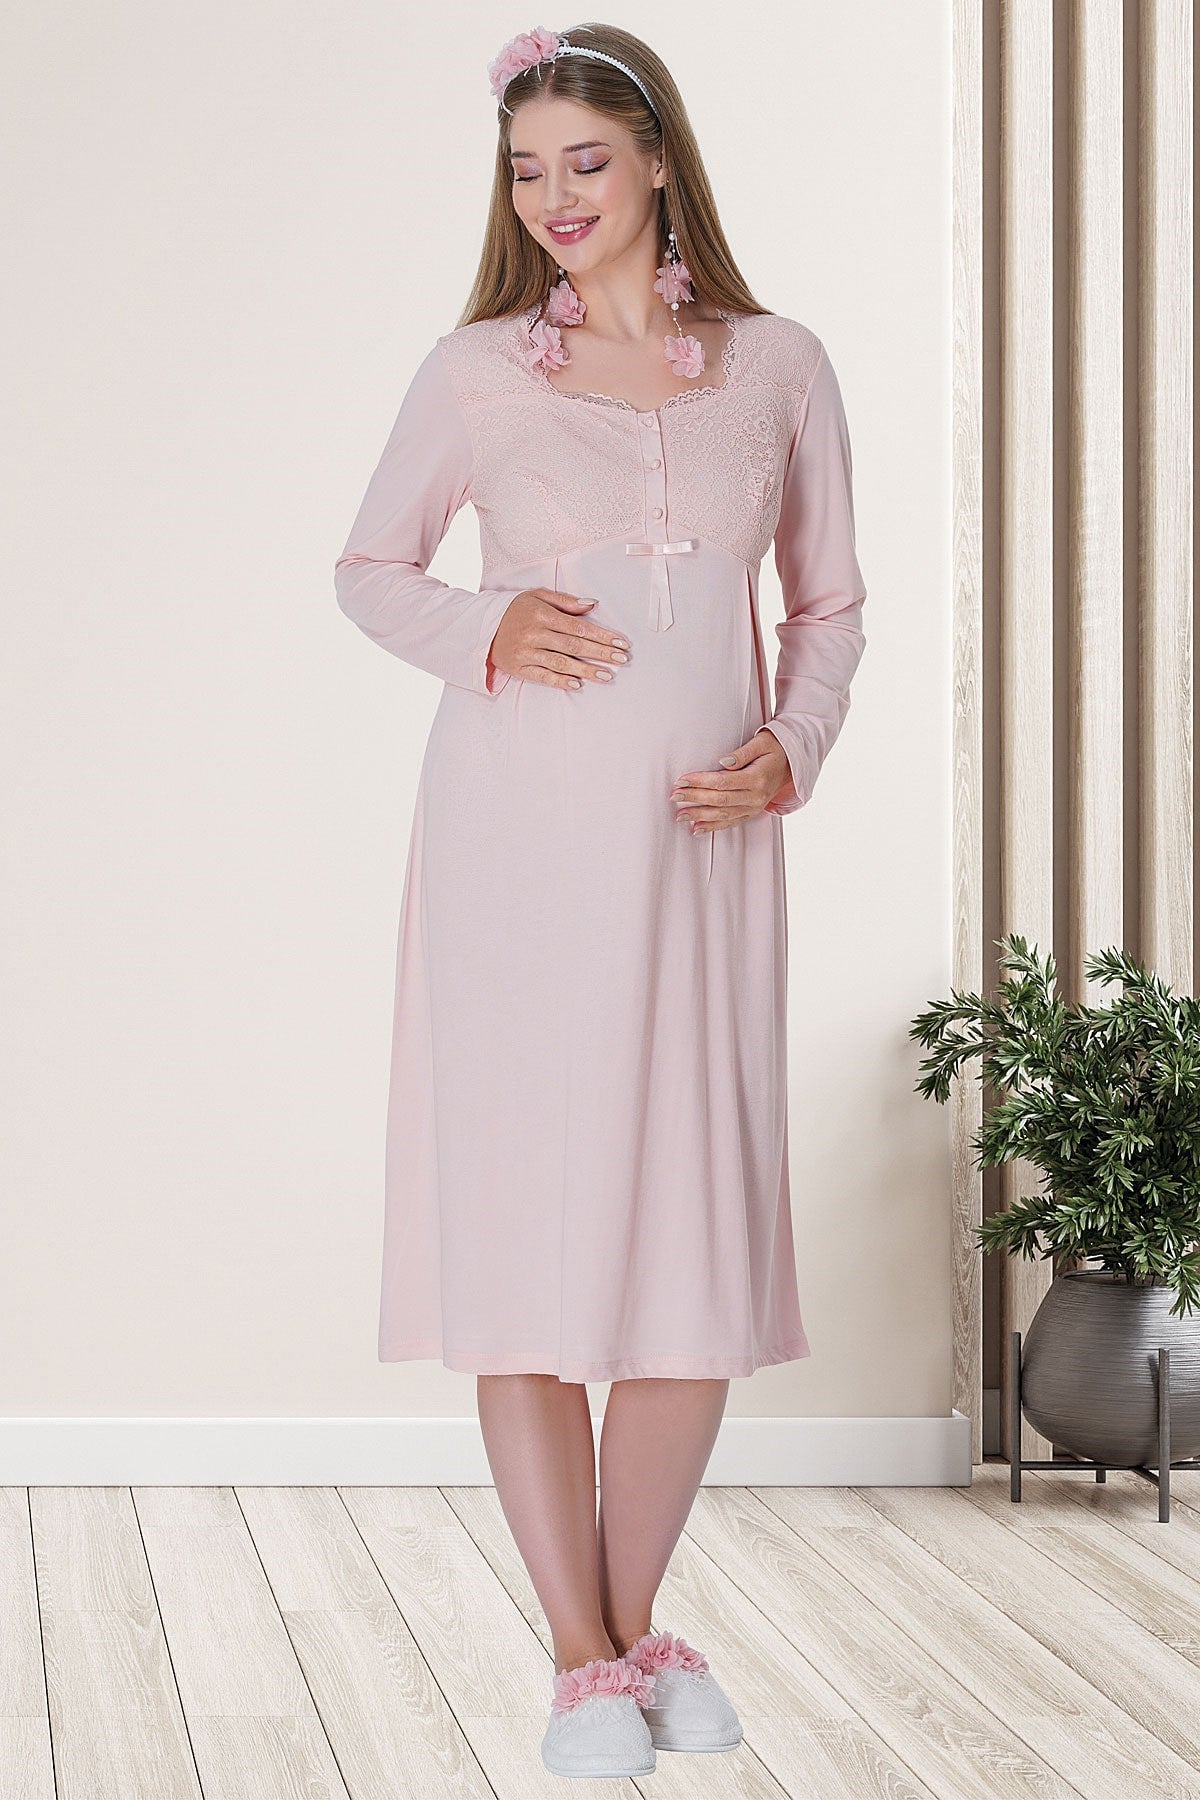 Shopymommy 5715 Lace Embroidered Maternity & Nursing Nightgown With Robe Powder